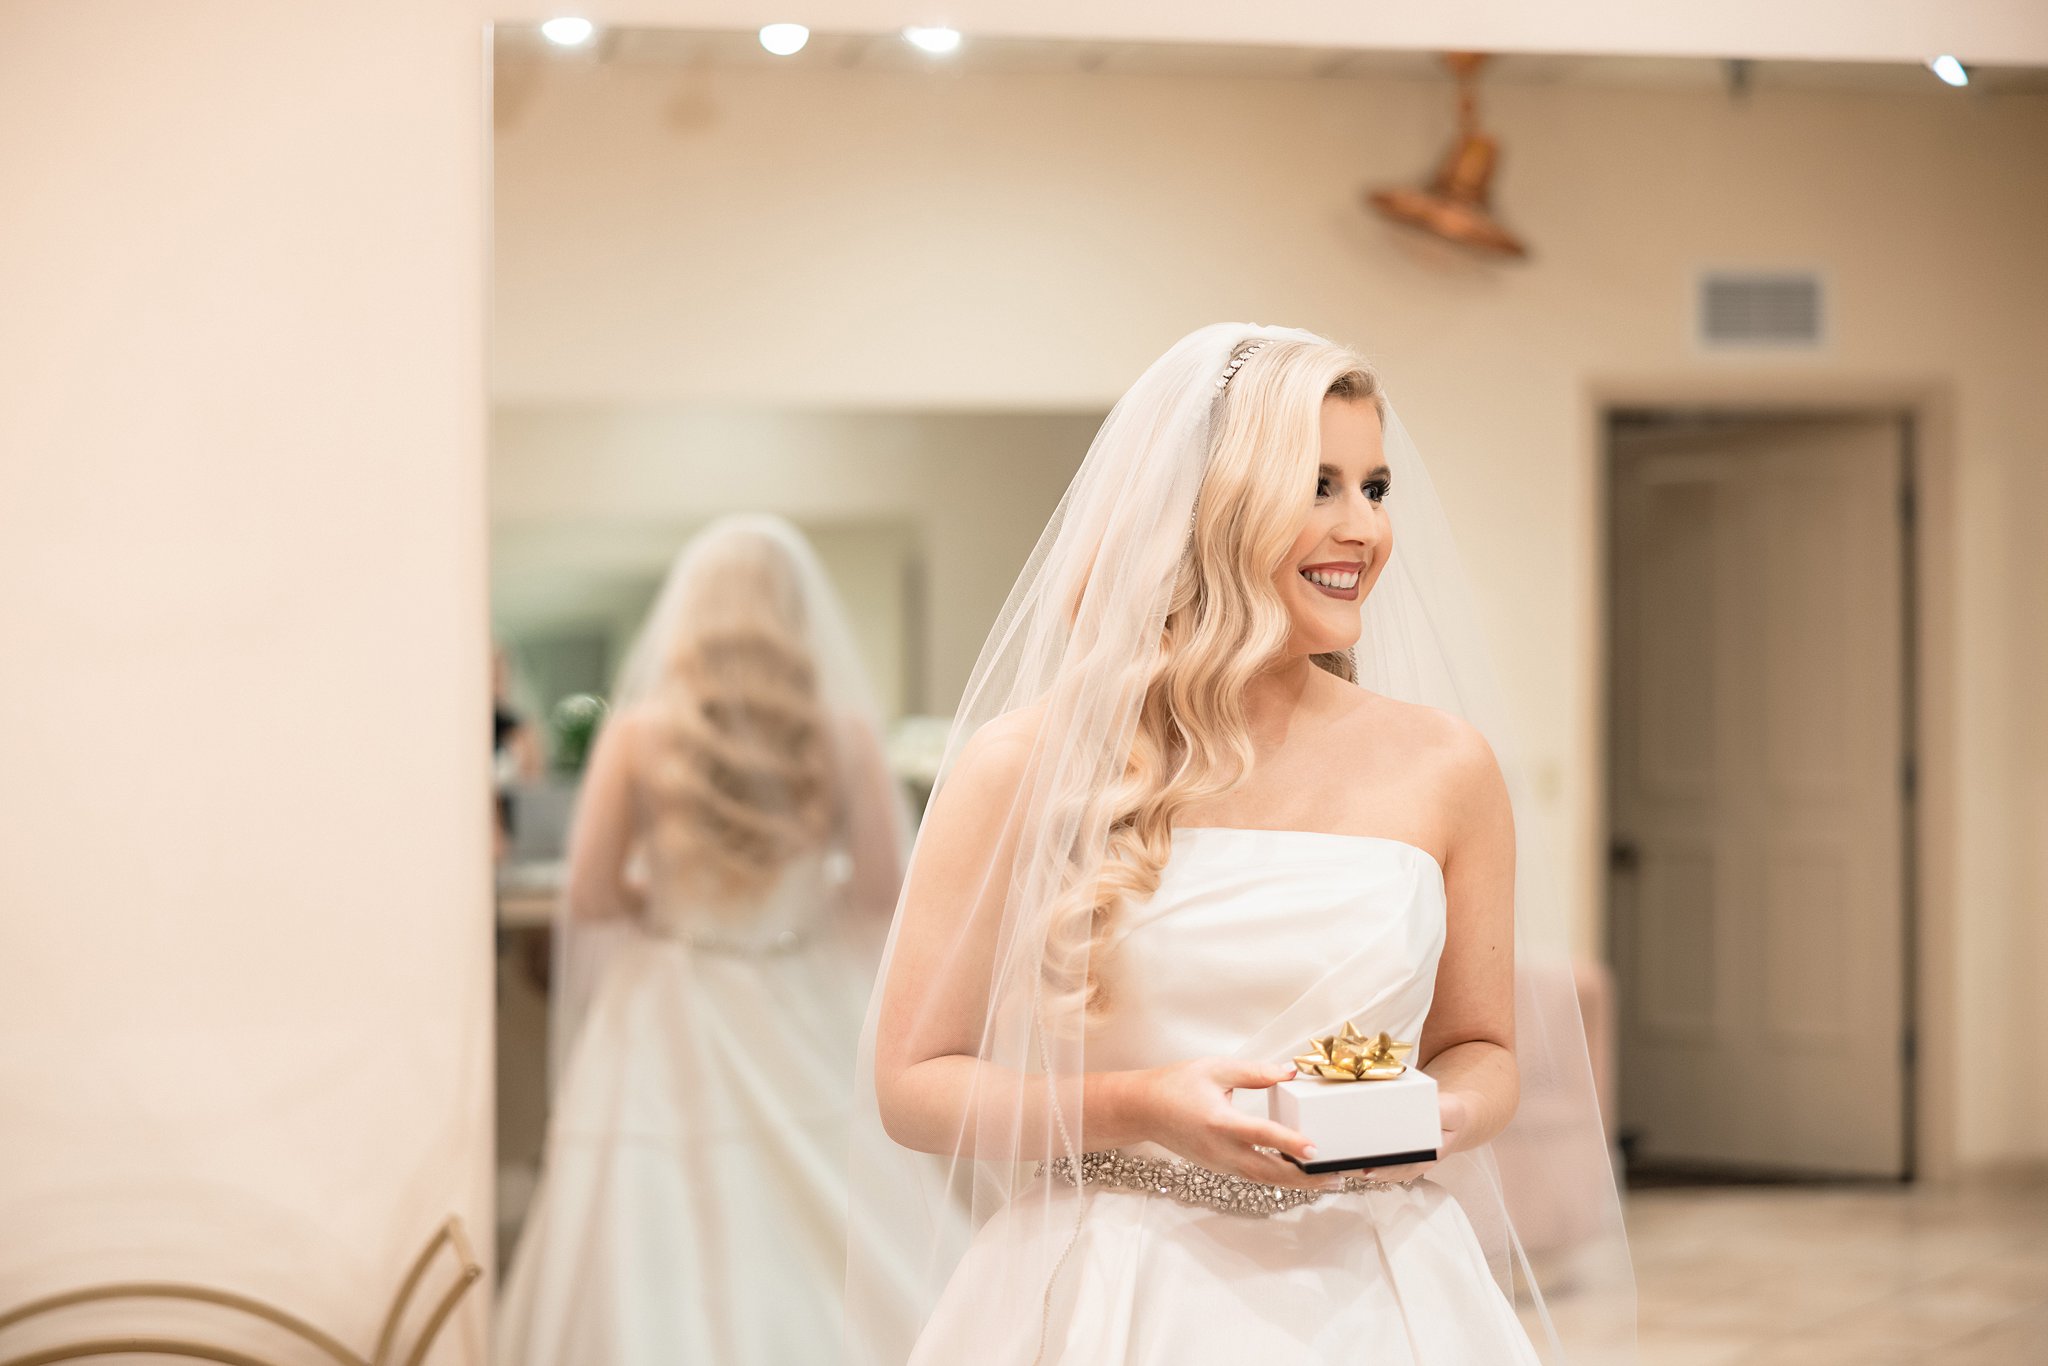 A bride opens a present in her getting ready room after getting dressed